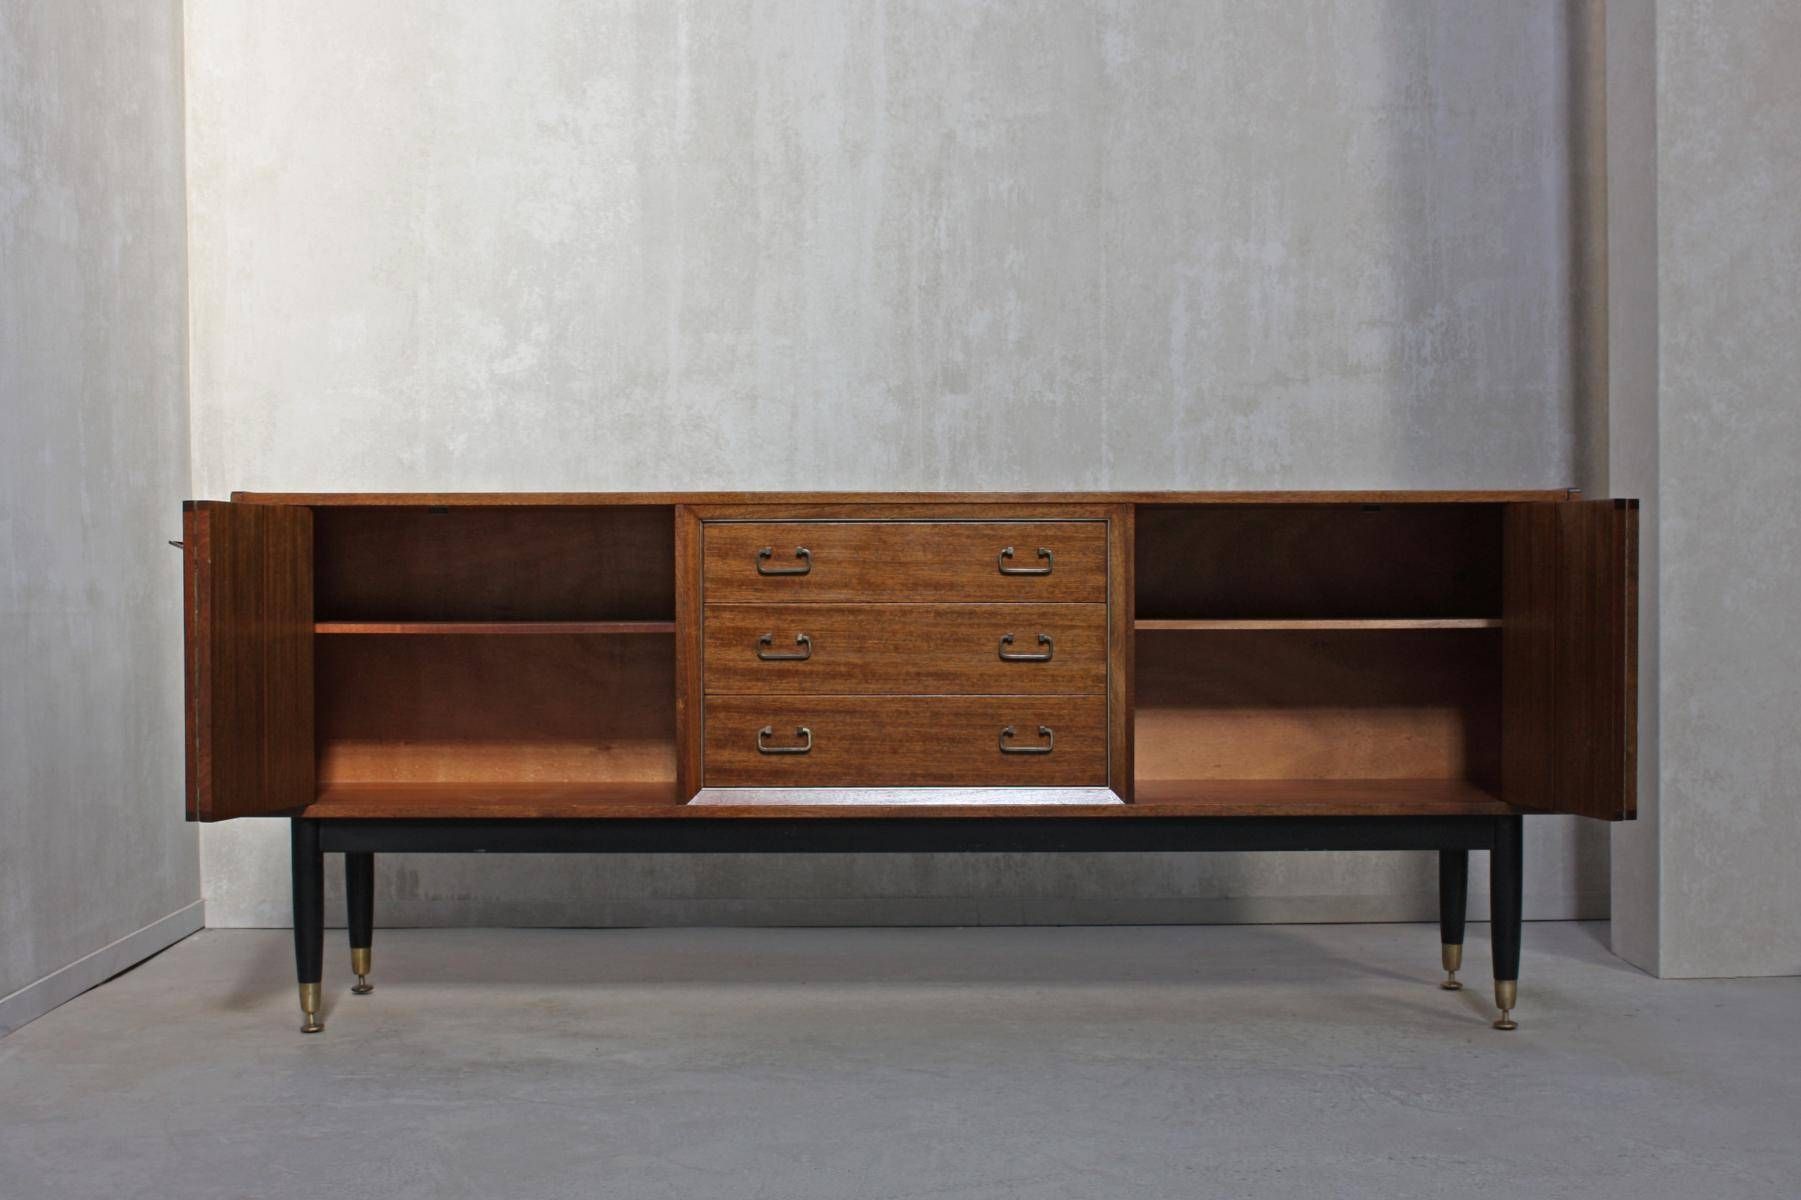 Vintage Sideboard From G Plan, 1950s For Sale At Pamono Intended For Most Current G Plan Vintage Sideboards (Photo 10 of 15)